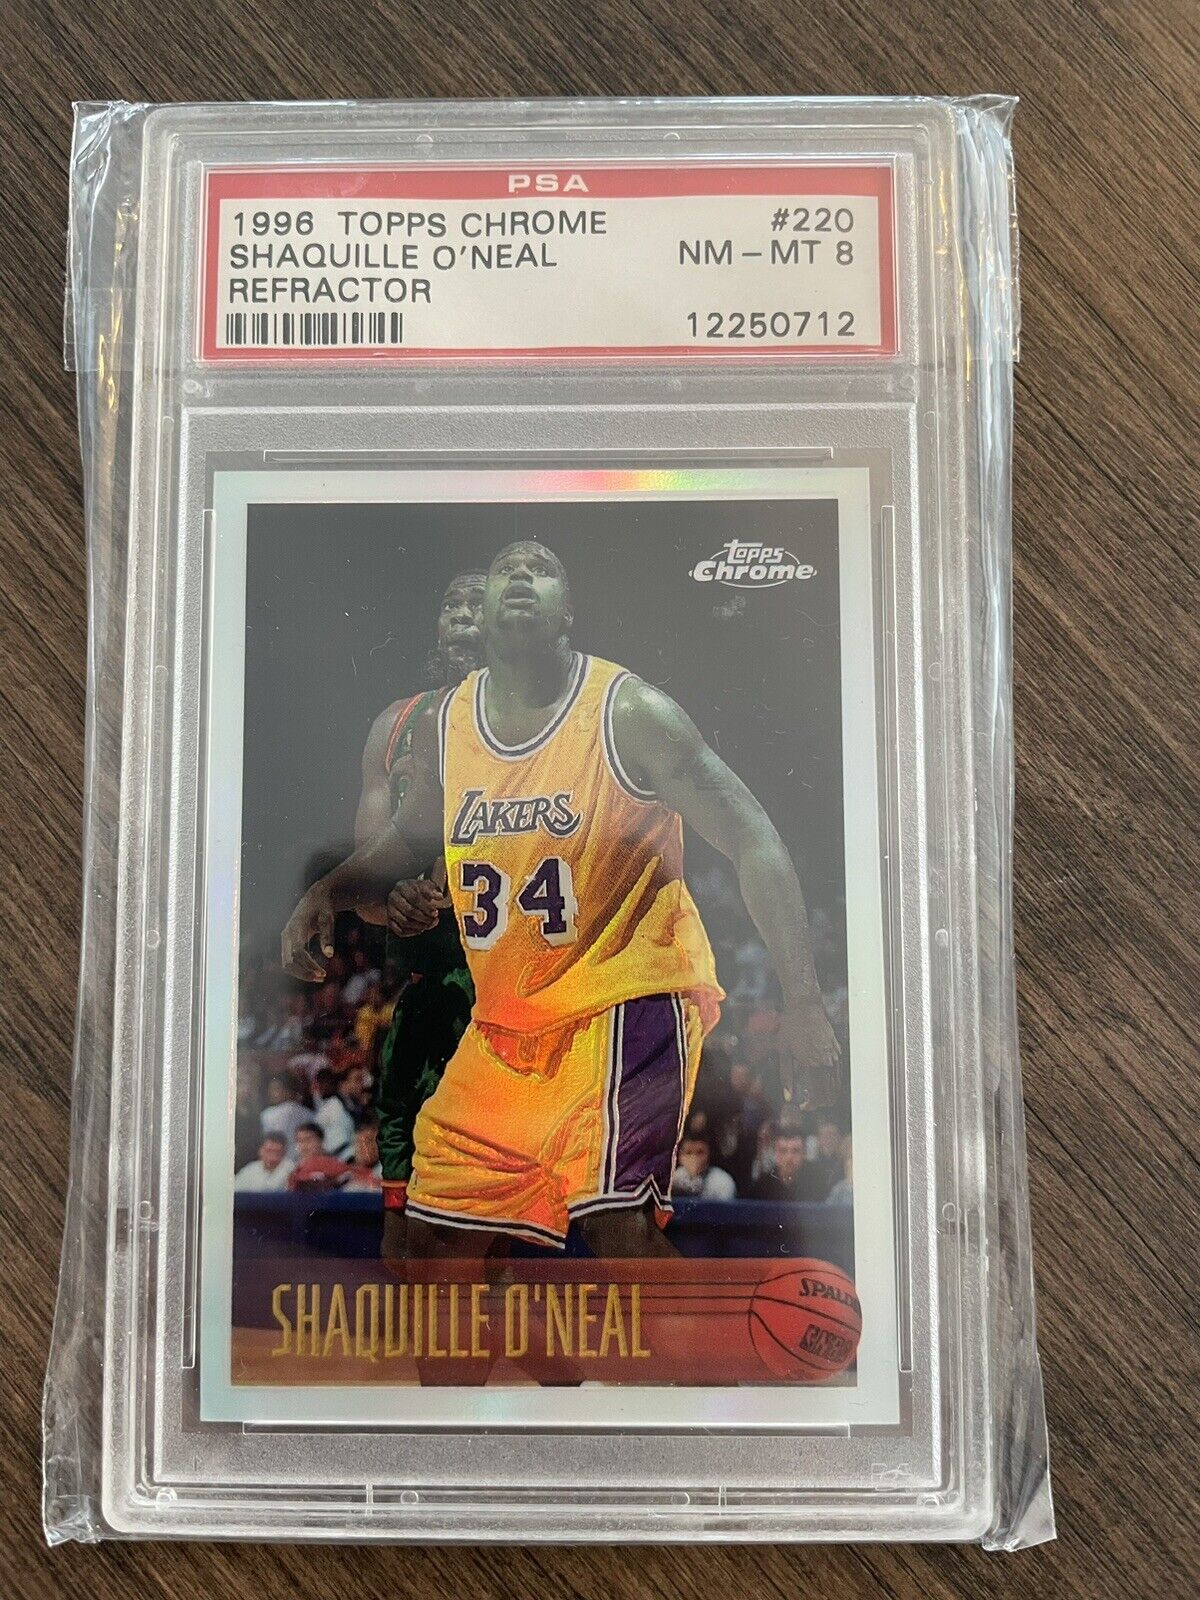 SHAQUILLE SHAQ O’NEAL PSA 8 1996 TOPPS CHROME #220 REFRACTOR LAKERS